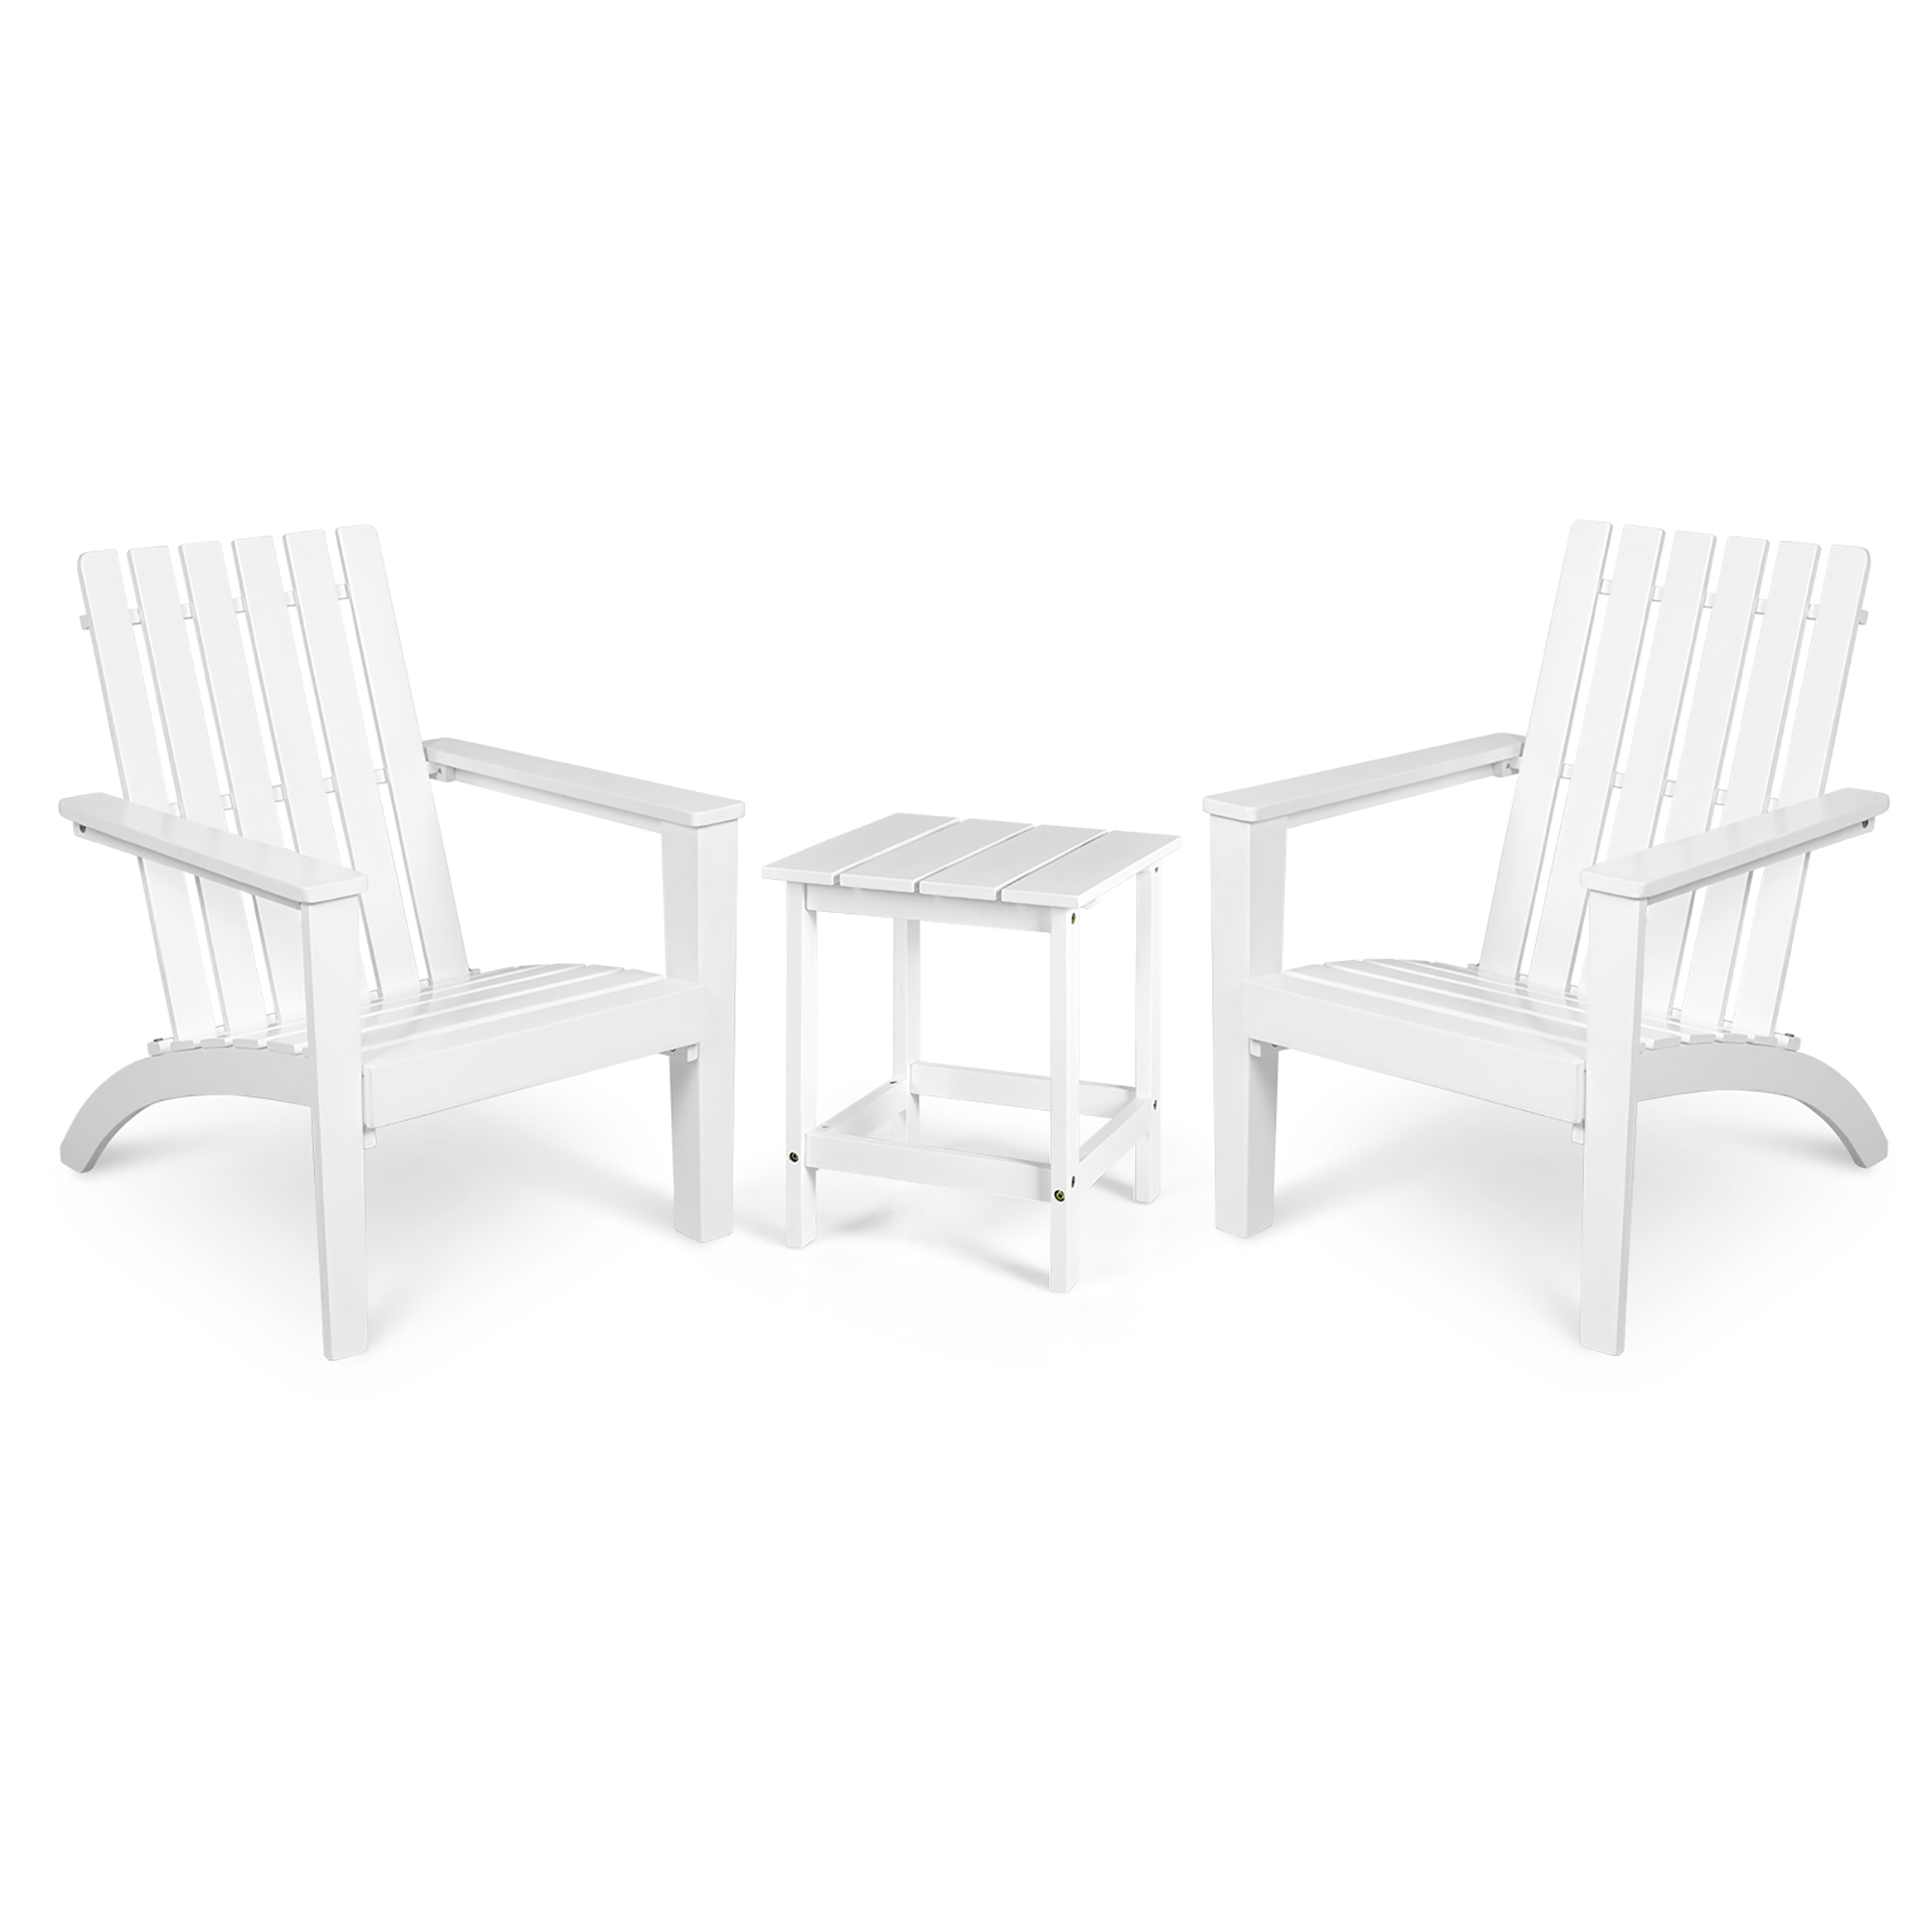 Costway 3PCS Patio Adirondack Chair Side Table Set Solid Wood Garden Deck White - image 1 of 9